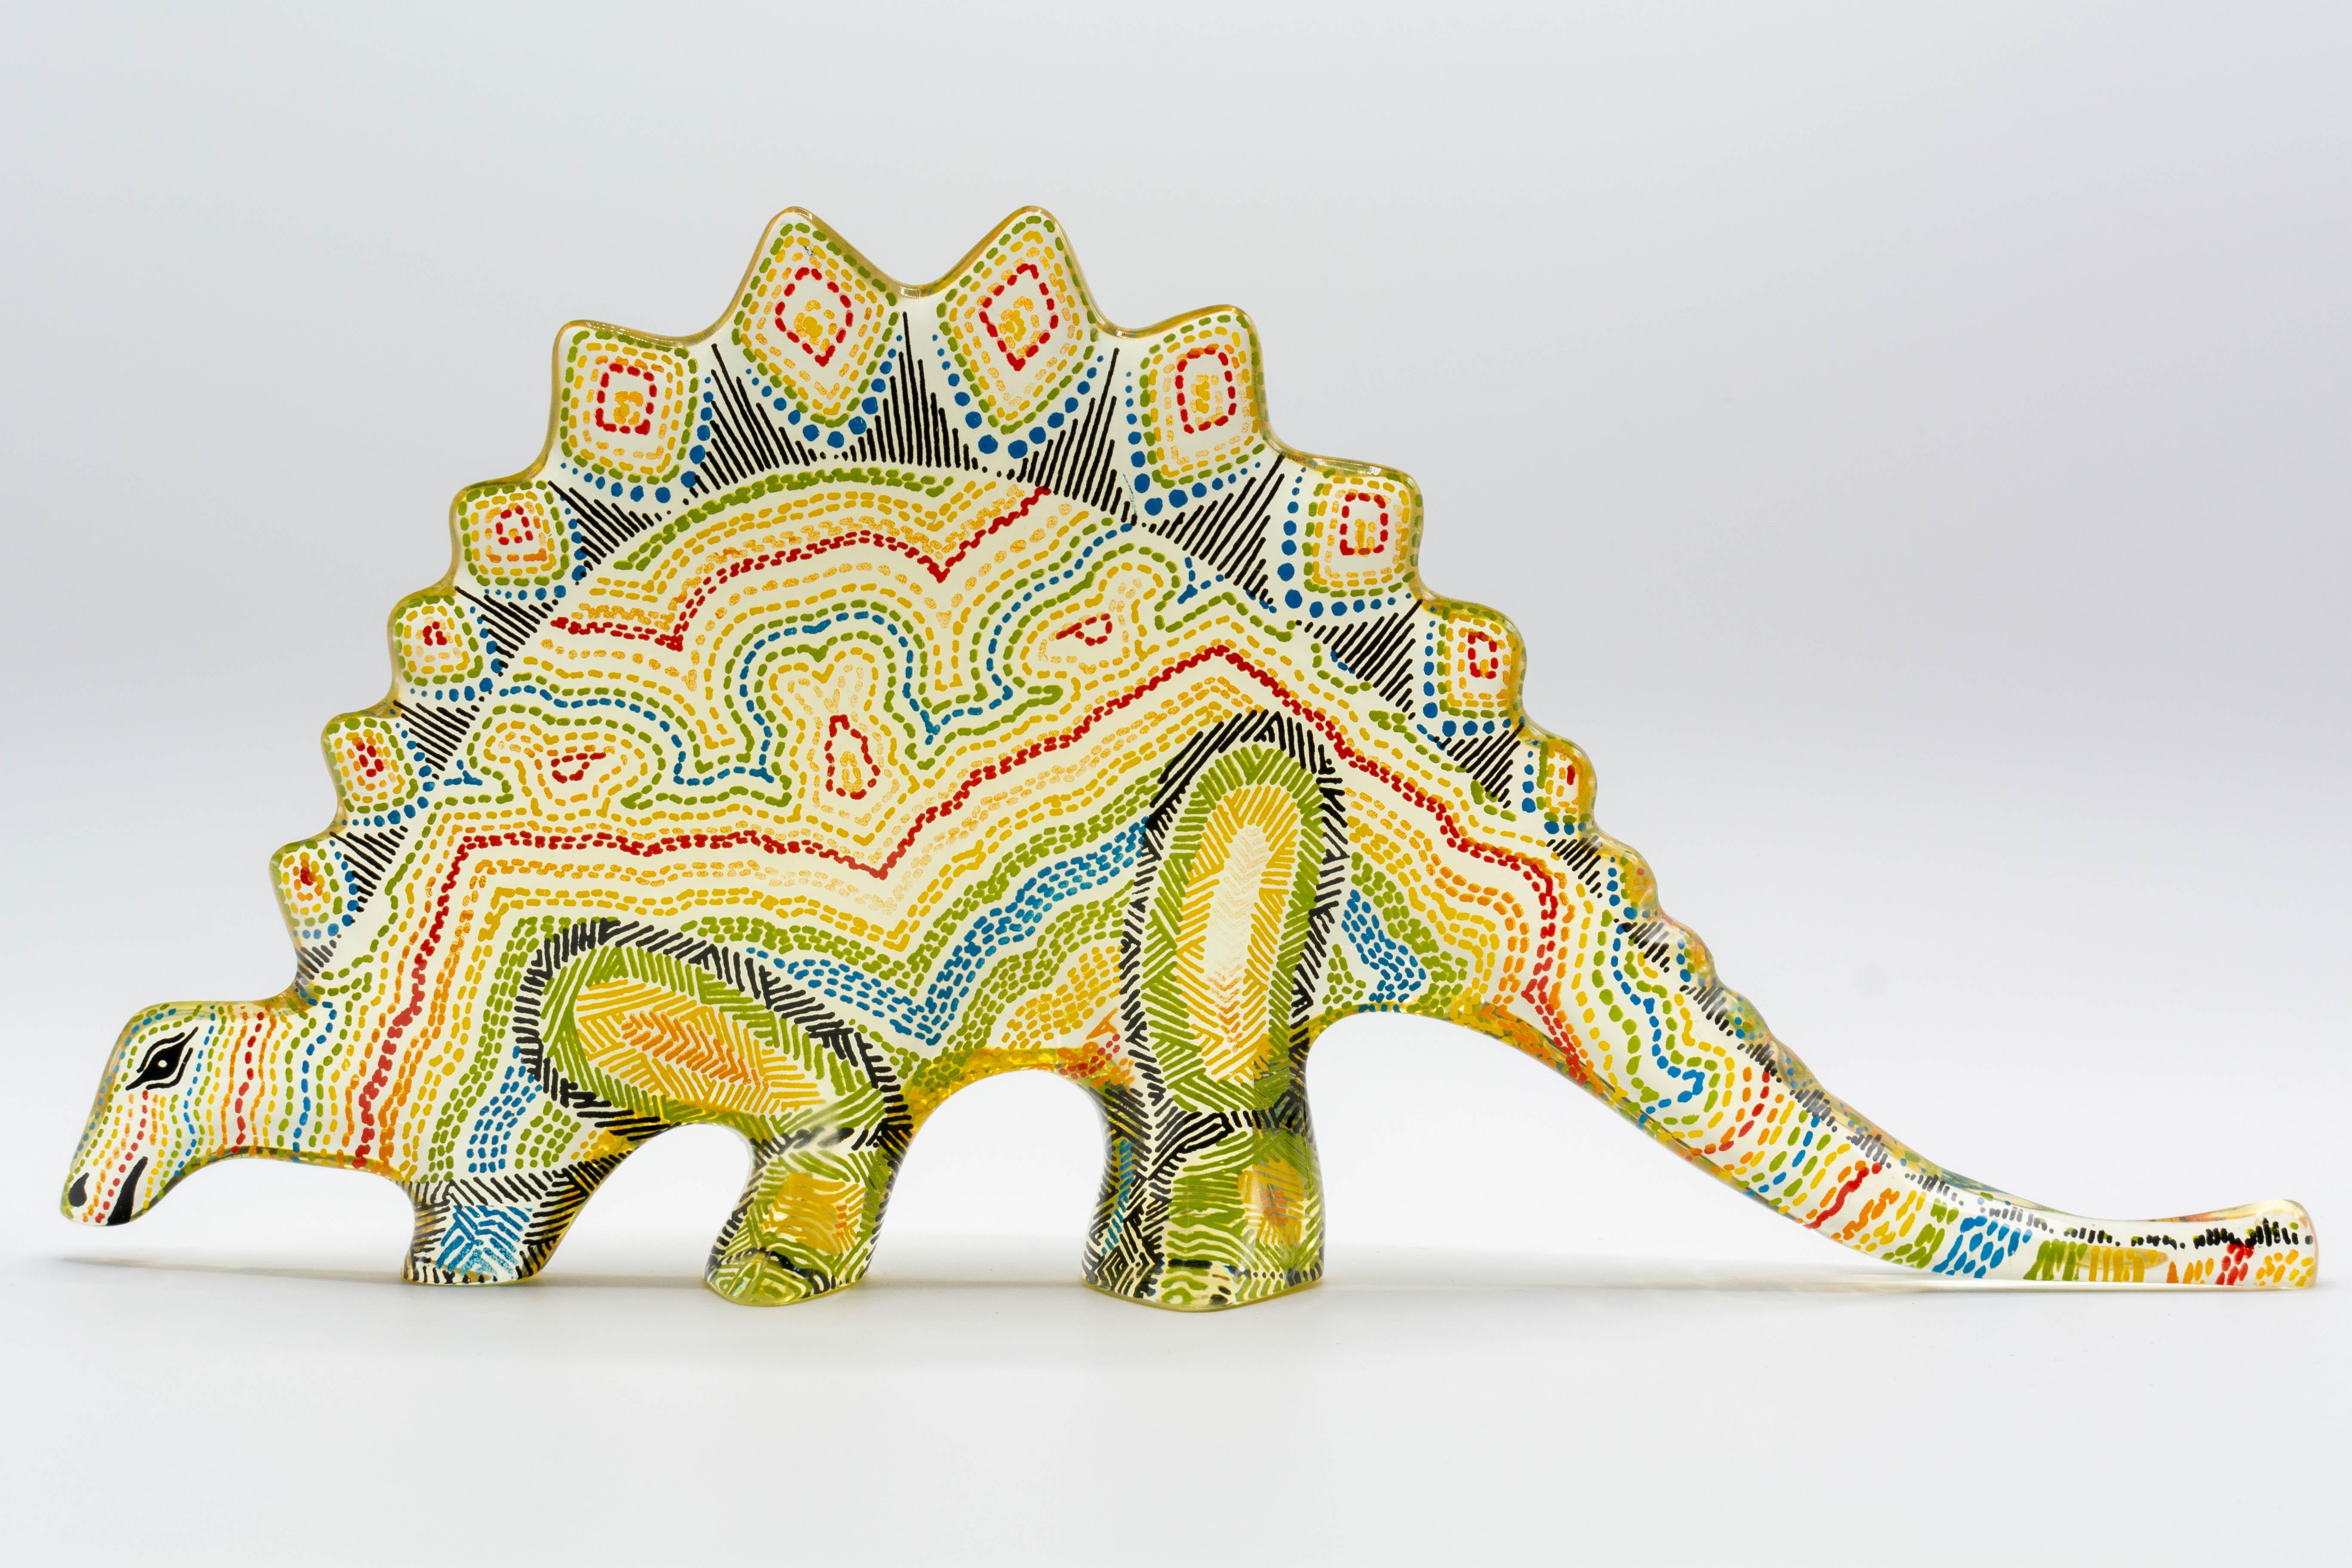 A Mid-Century Modern Lucite Op Art dinosaur designed by Abraham Palatnik. A colorful stegosaurus in yellow, green, red and blue. Abraham Palatnik (born in 1928) is a Brazilian artist and inventor whose innovations include kinechromatic art. Part of